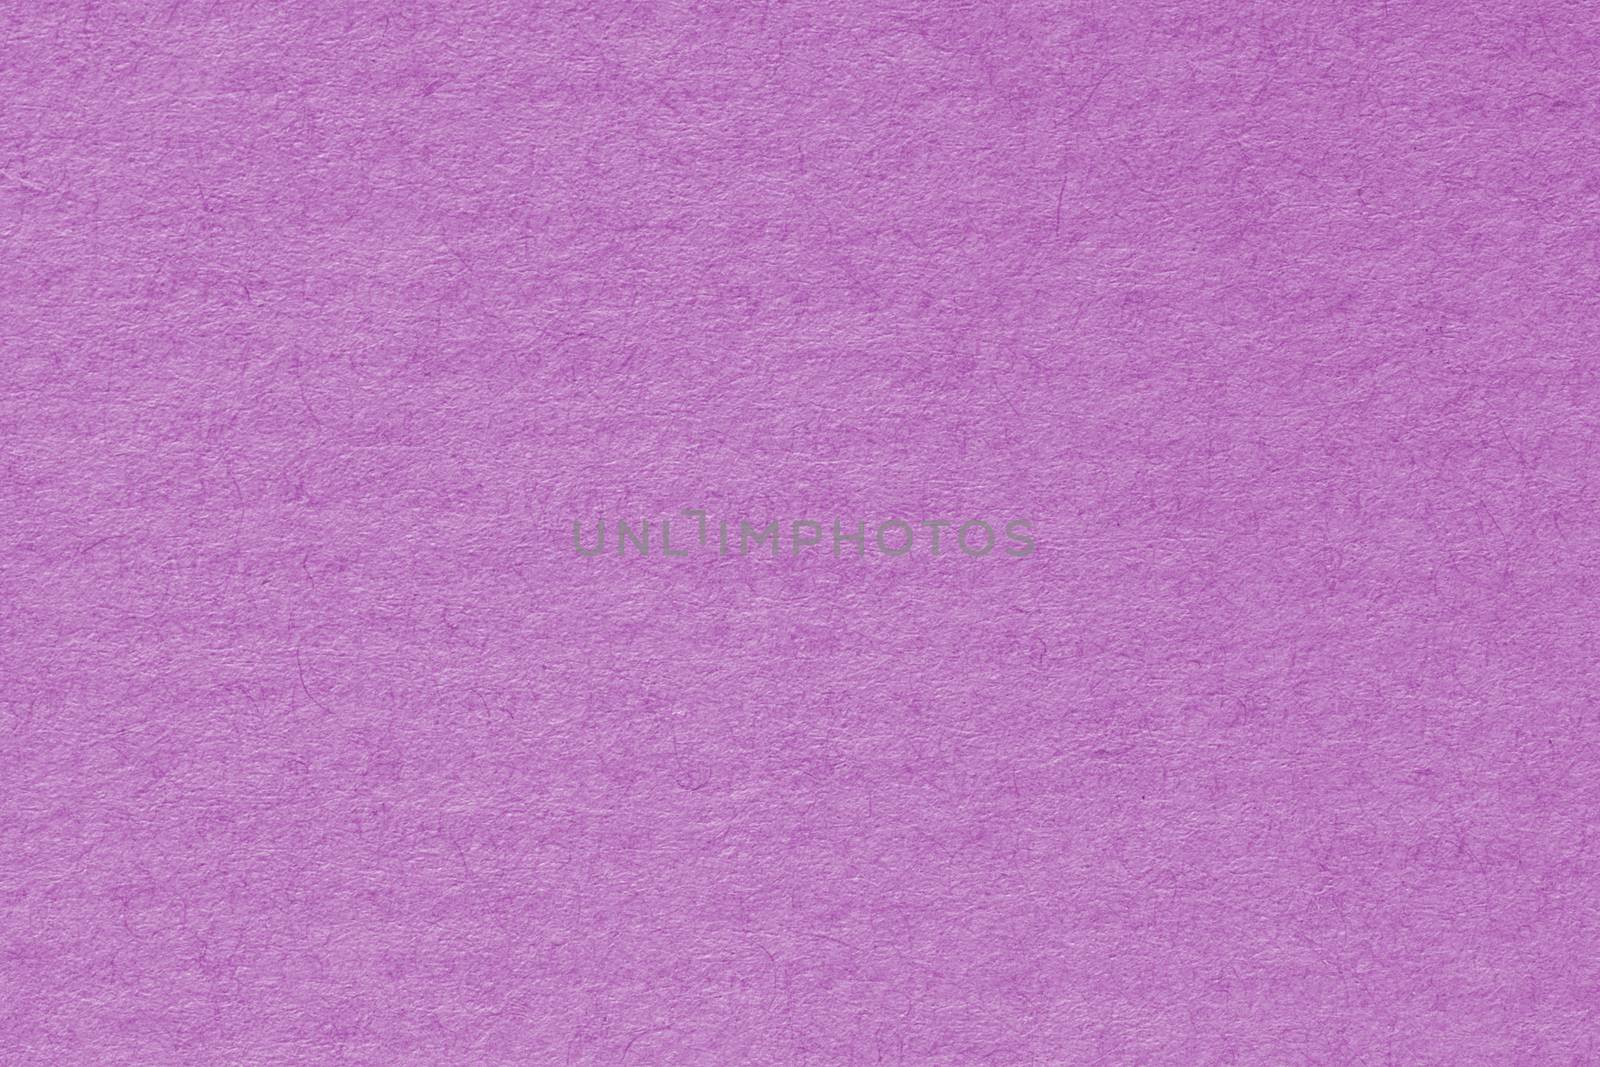 Pink washed paper texture background. Recycled paper texture. by ivo_13